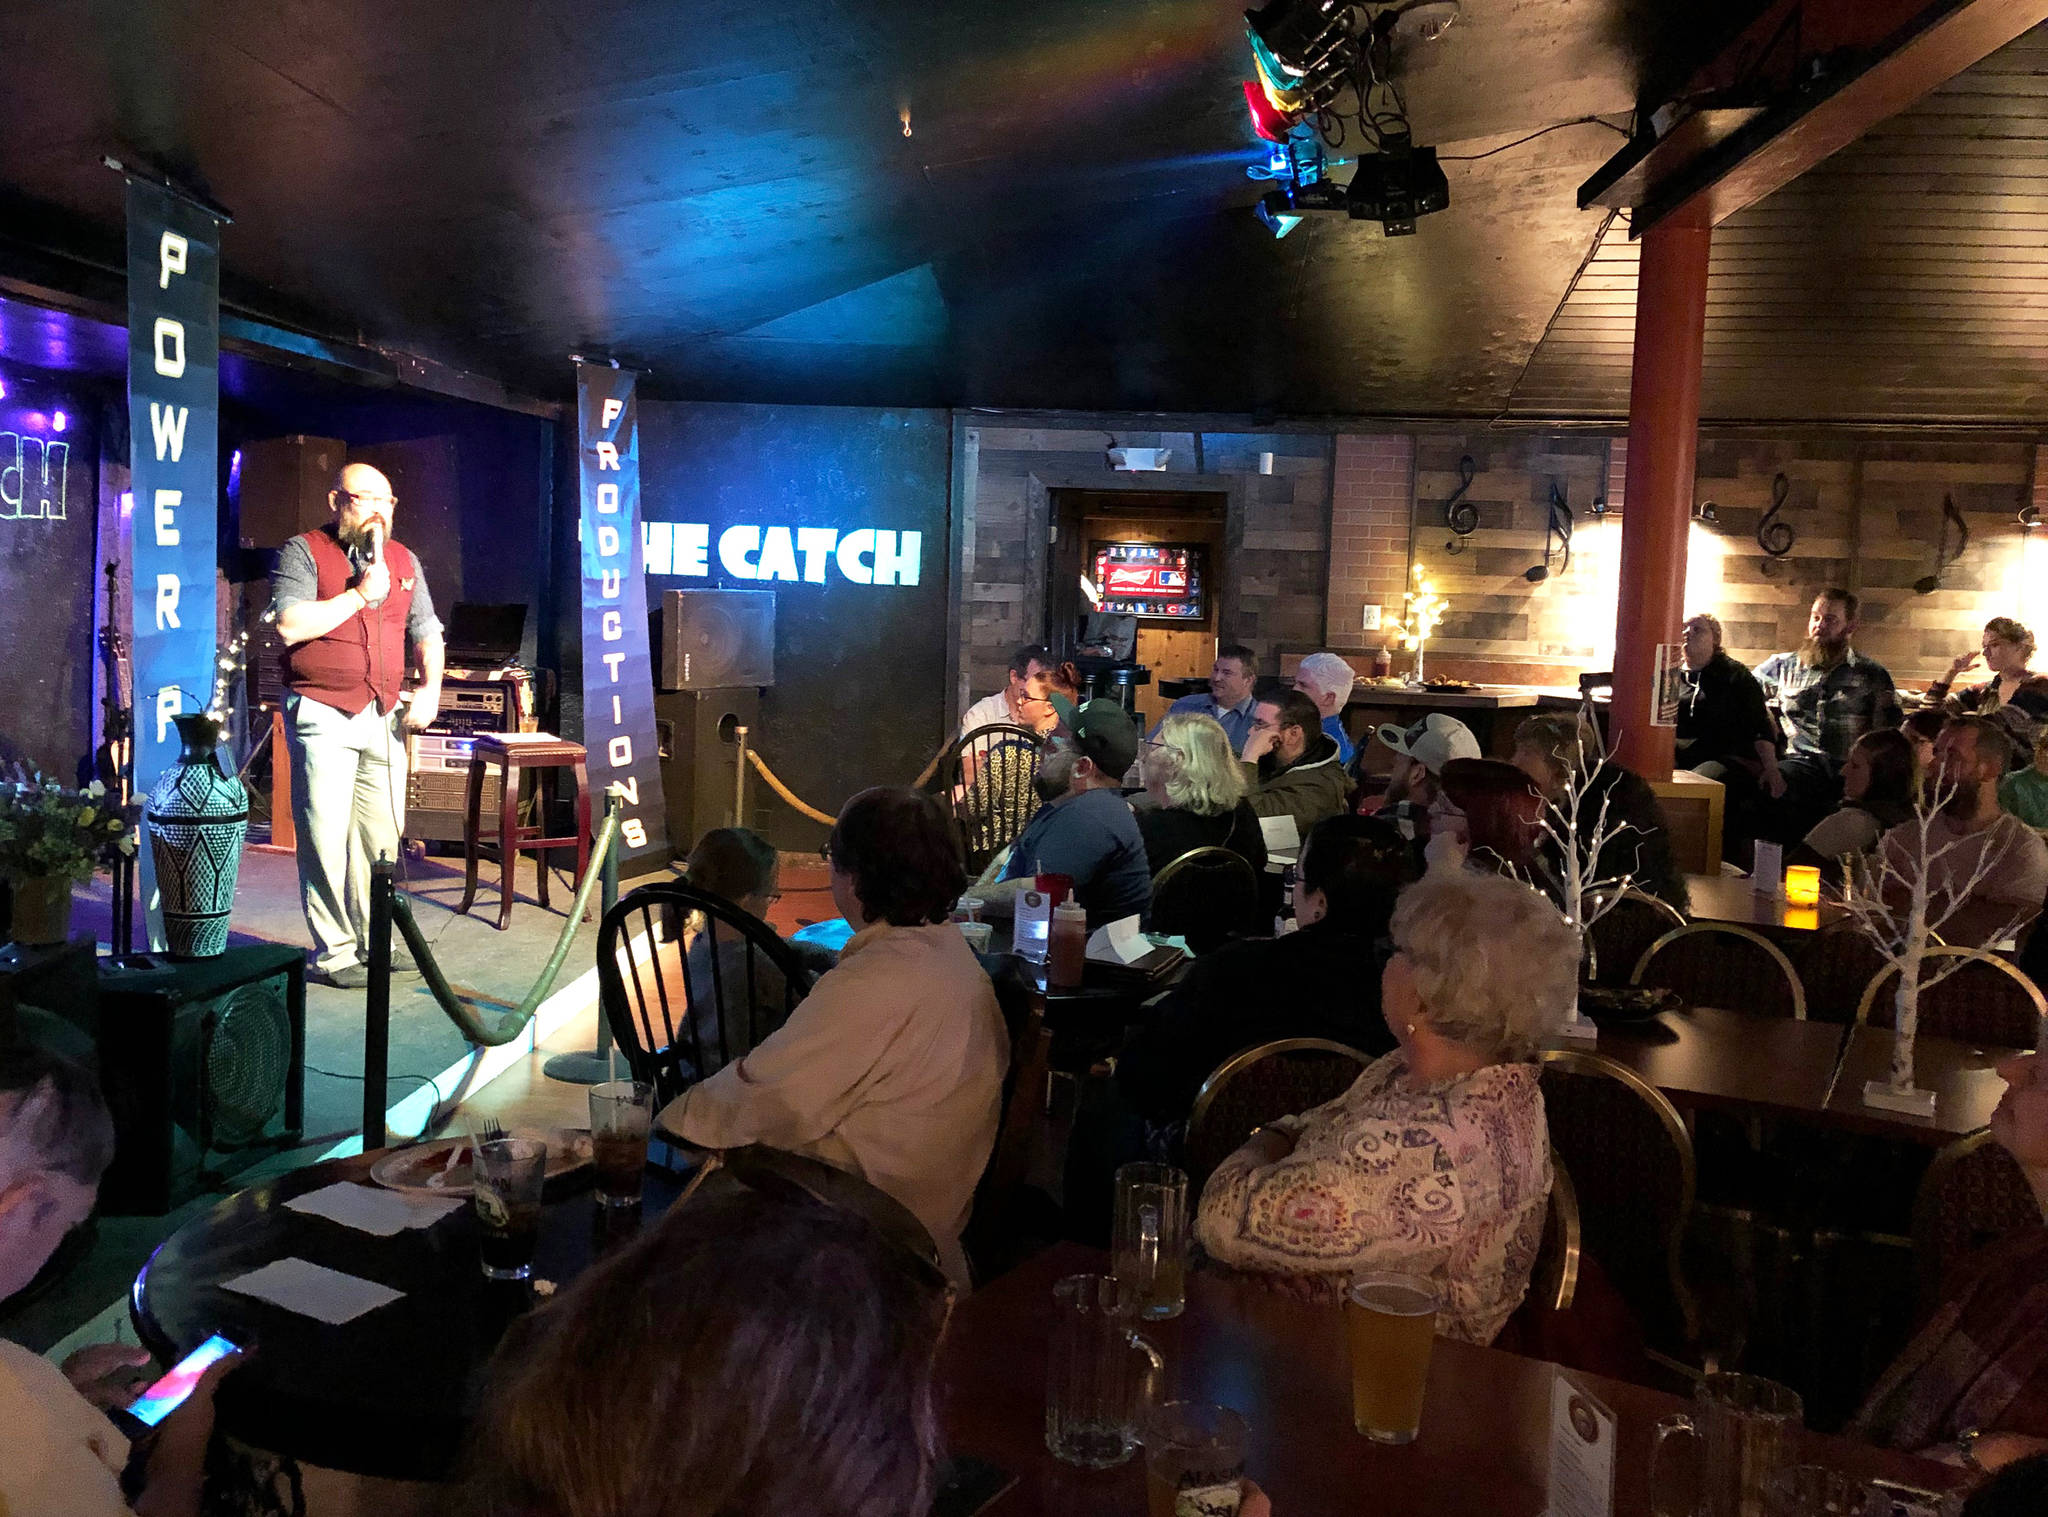 Photos by Joey Klecka / Peninsula Clarion                                Stand-up comedian Fred Koski performs his act Friday during “Comedy at The Catch” at The Catch restaurant in Soldotna.